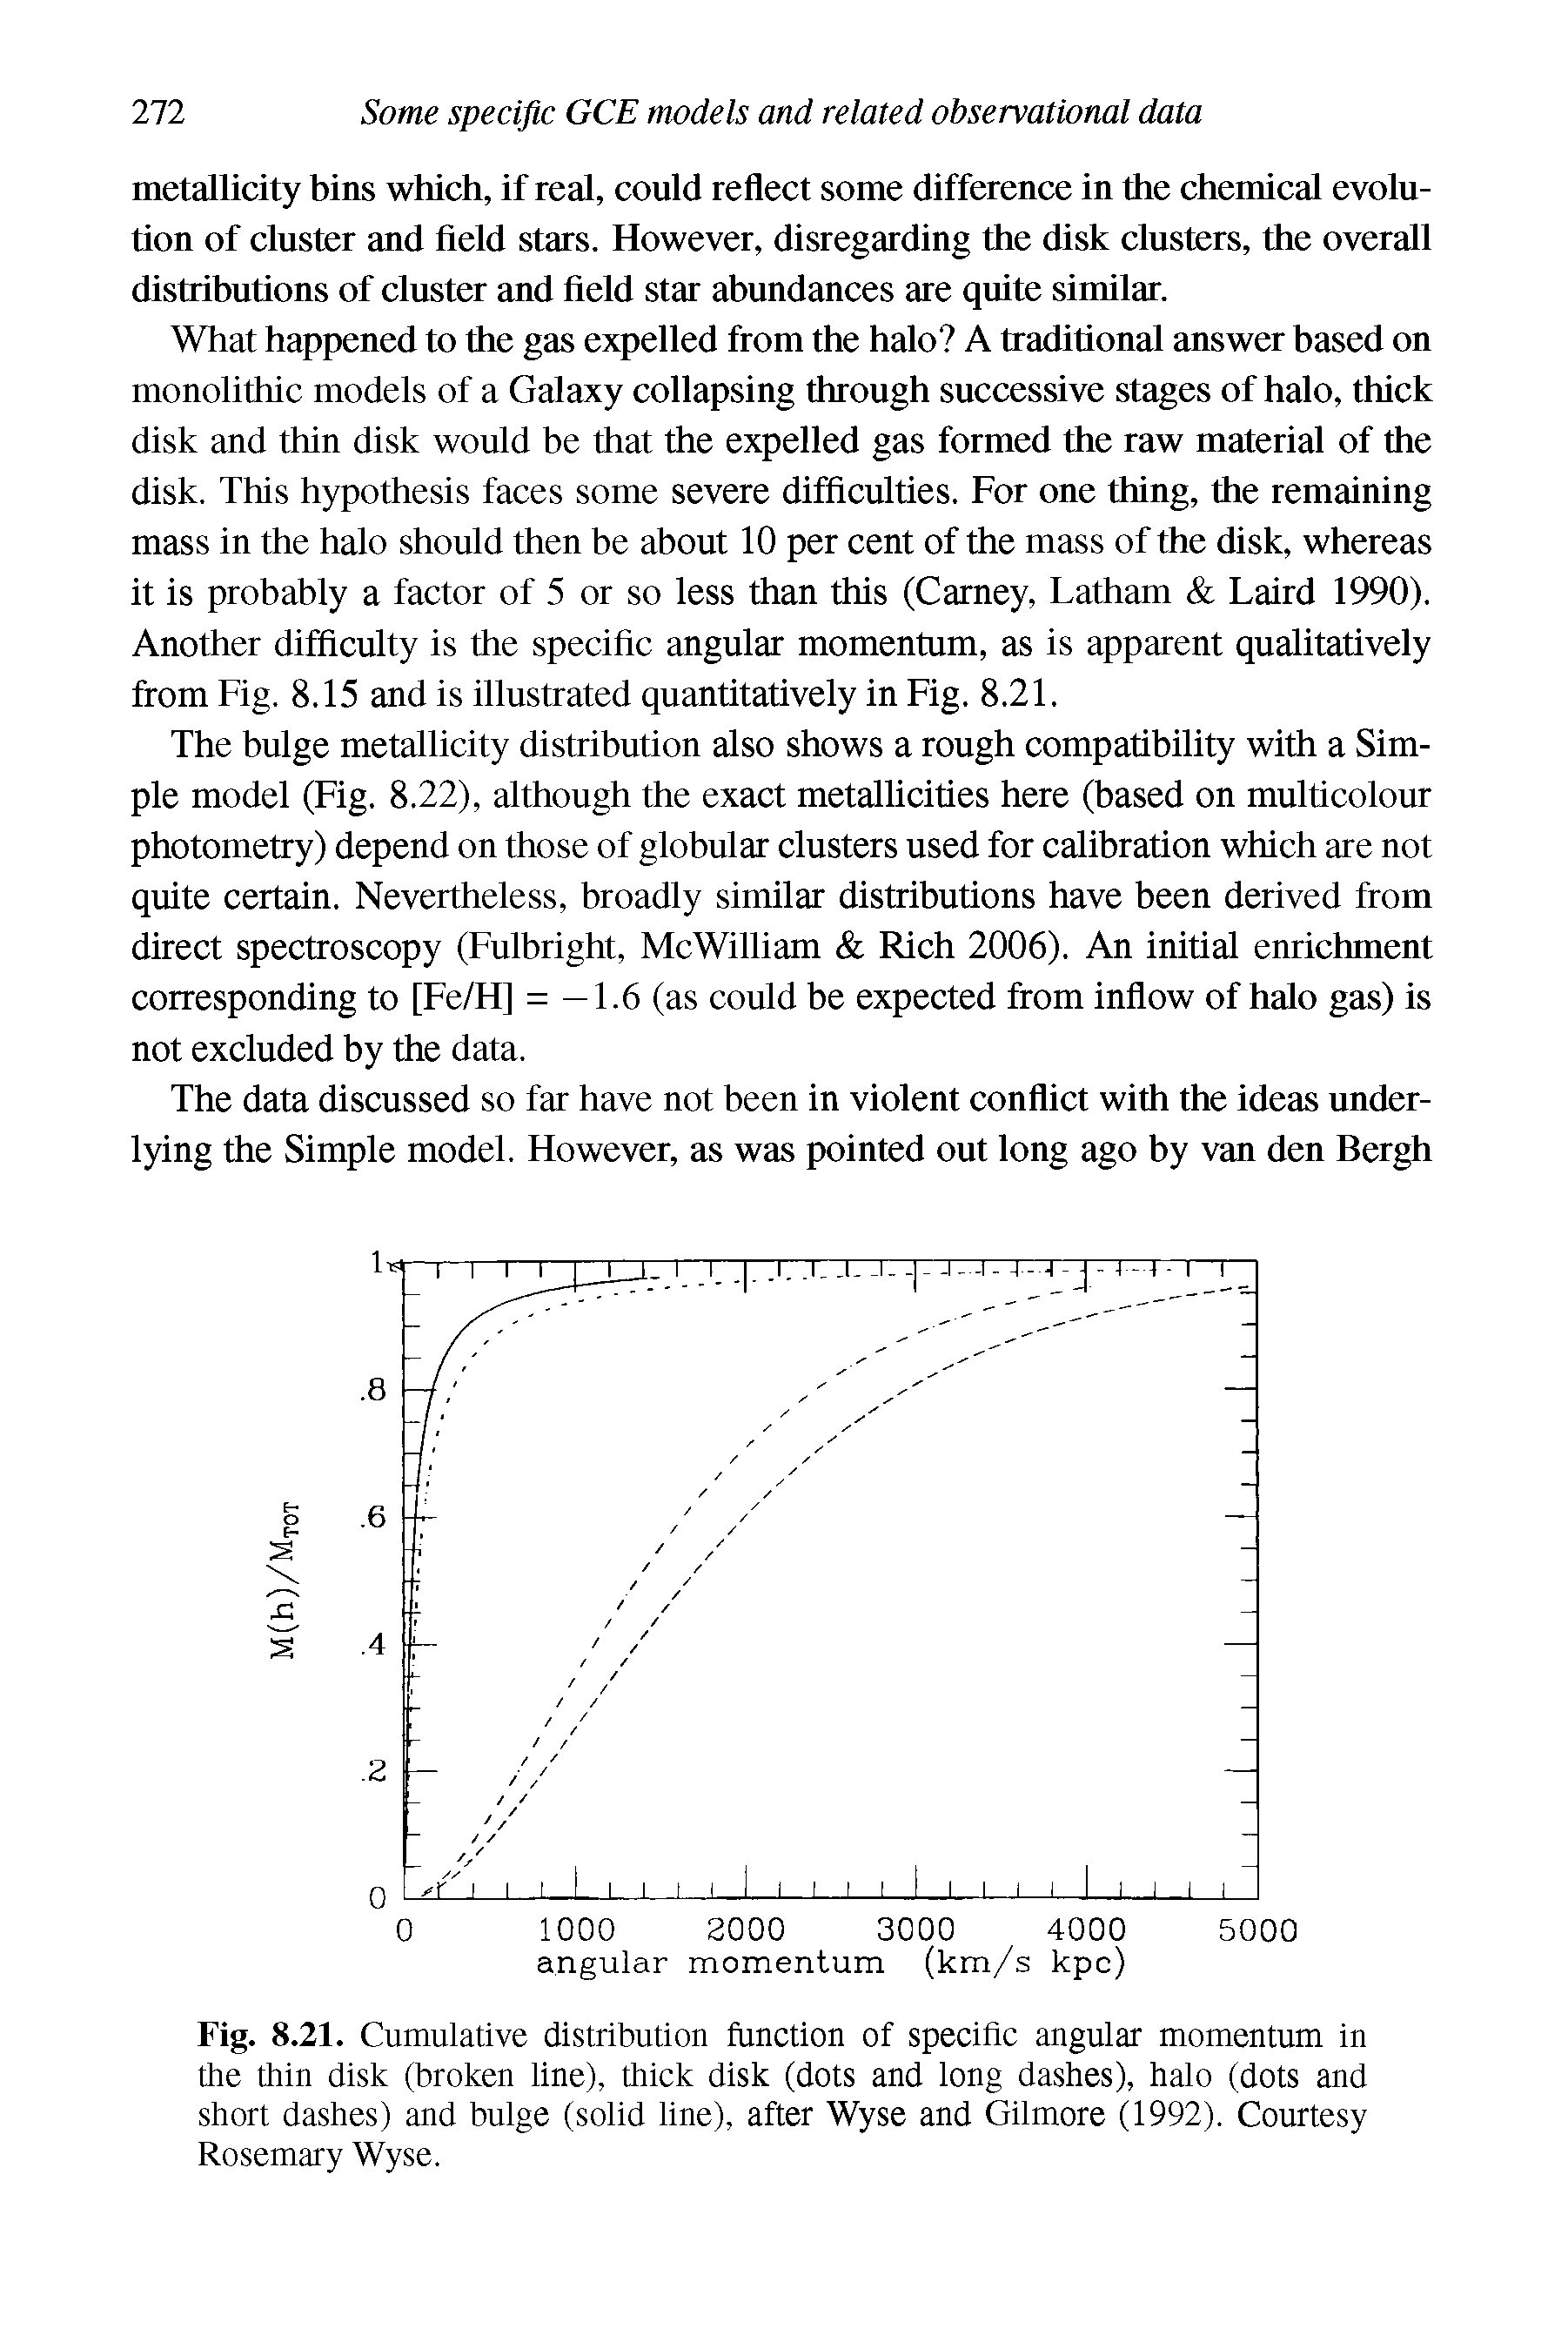 Fig. 8.21. Cumulative distribution function of specific angular momentum in the thin disk (broken line), thick disk (dots and long dashes), halo (dots and short dashes) and bulge (solid line), after Wyse and Gilmore (1992). Courtesy Rosemary Wyse.